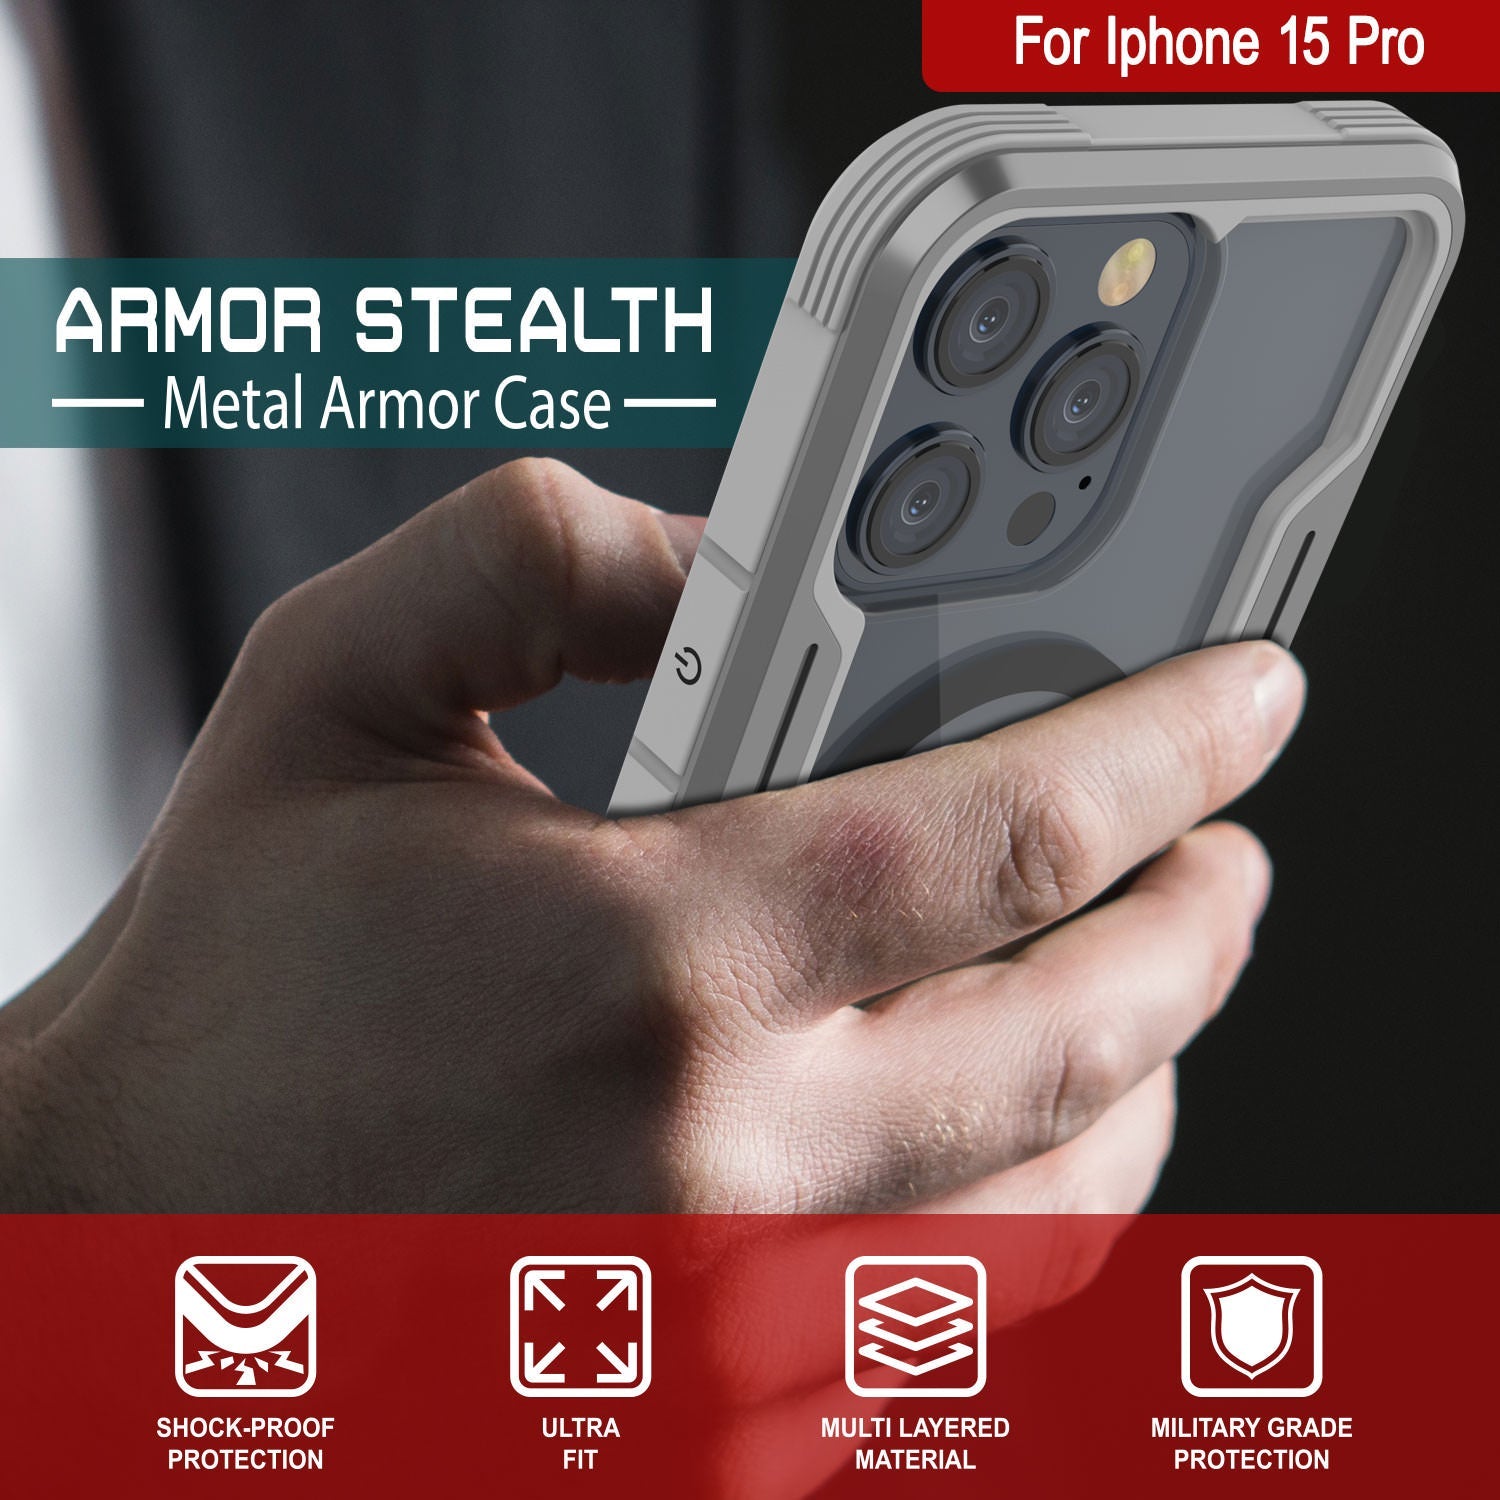 Punkcase iPhone 15 Pro Armor Stealth MAG Defense Case Protective Military Grade Multilayer Cover [Grey]